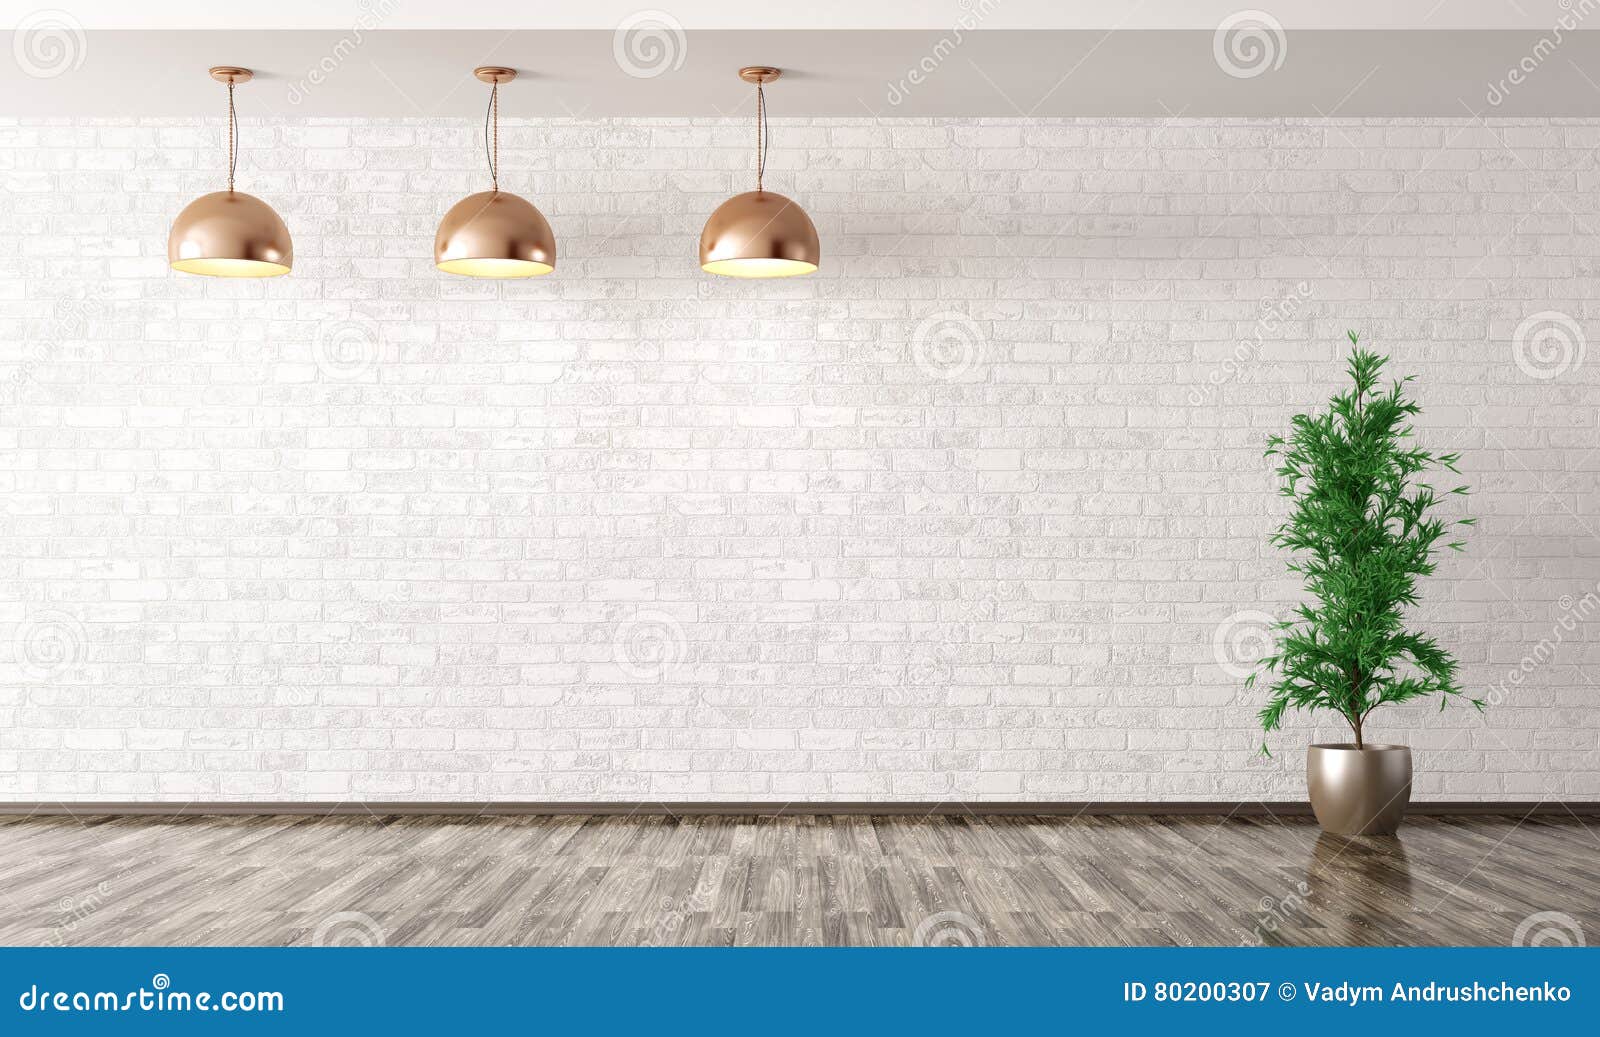 Room With Copper Metal Lamps Over White Brick Wall 3d Rendering Stock Illustration Illustration Of Background Texture